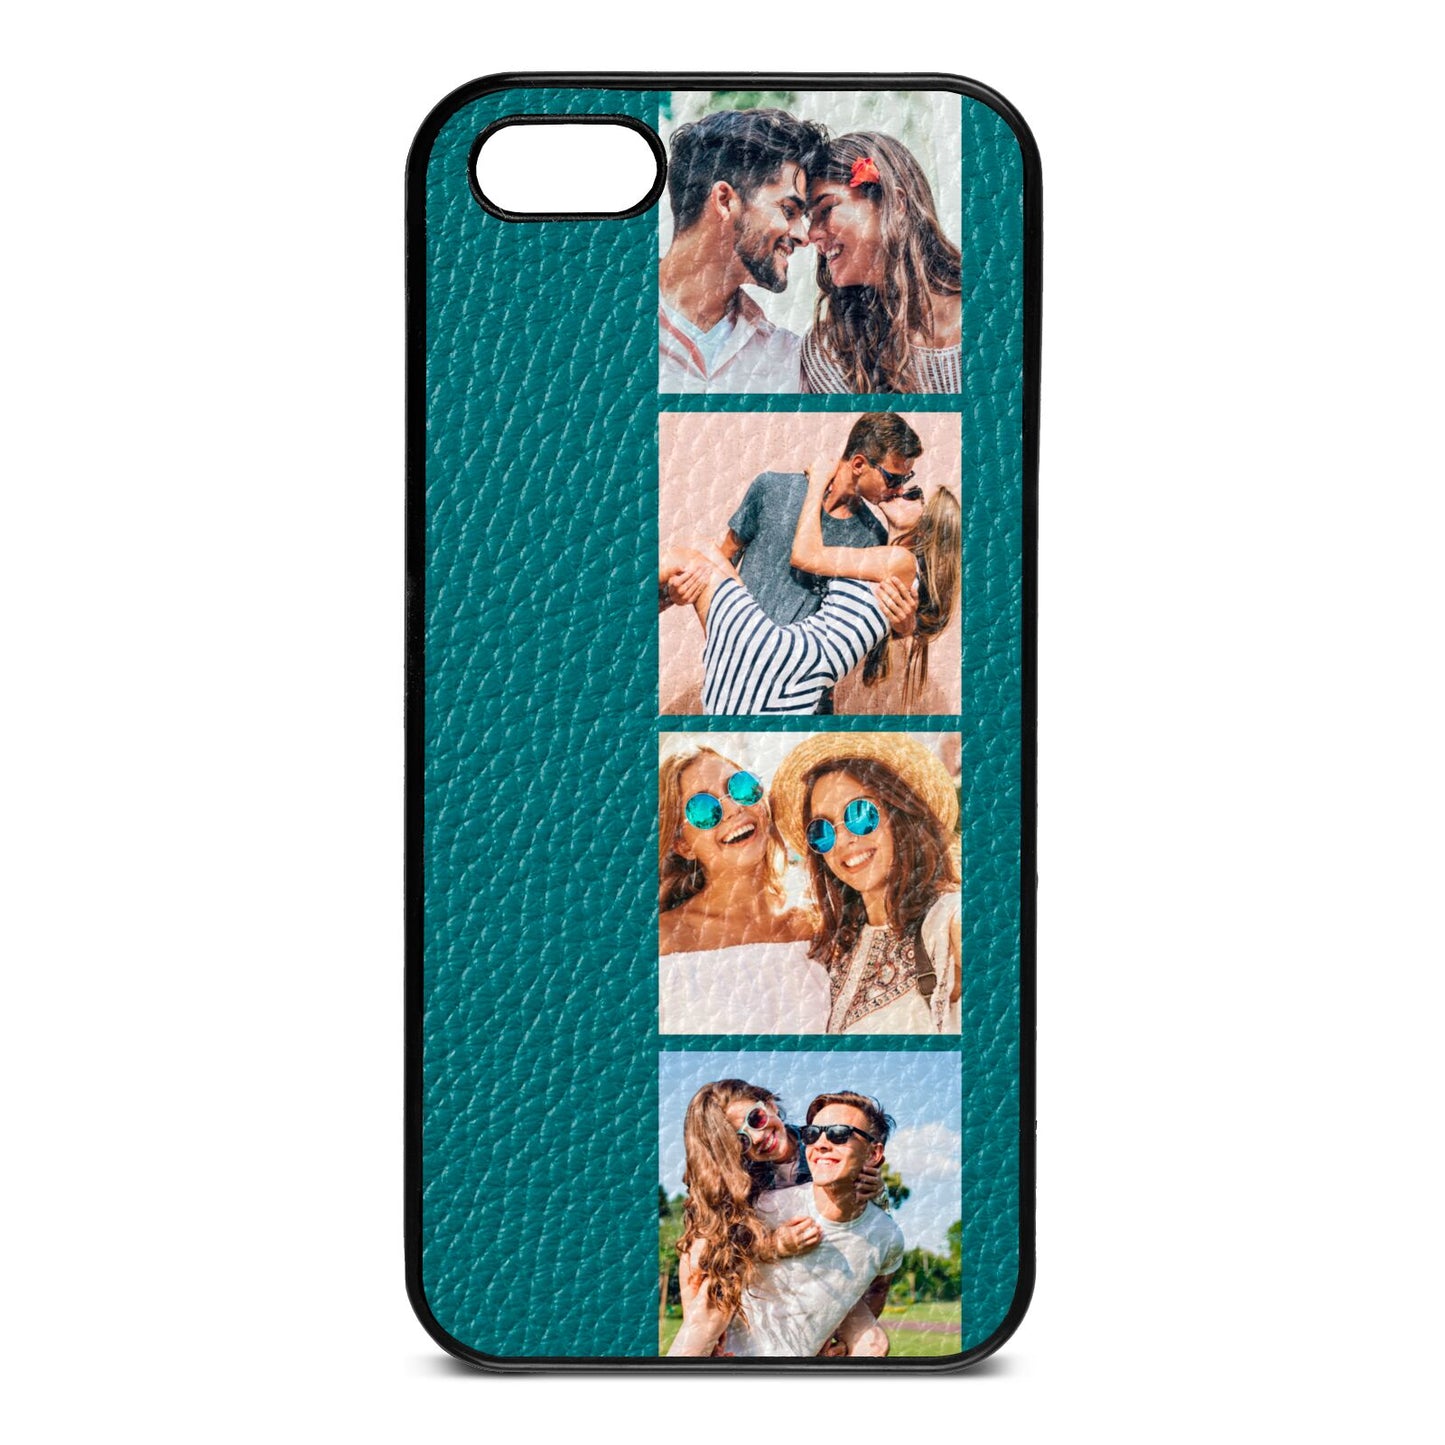 Photo Strip Montage Upload Green Pebble Leather iPhone 5 Case